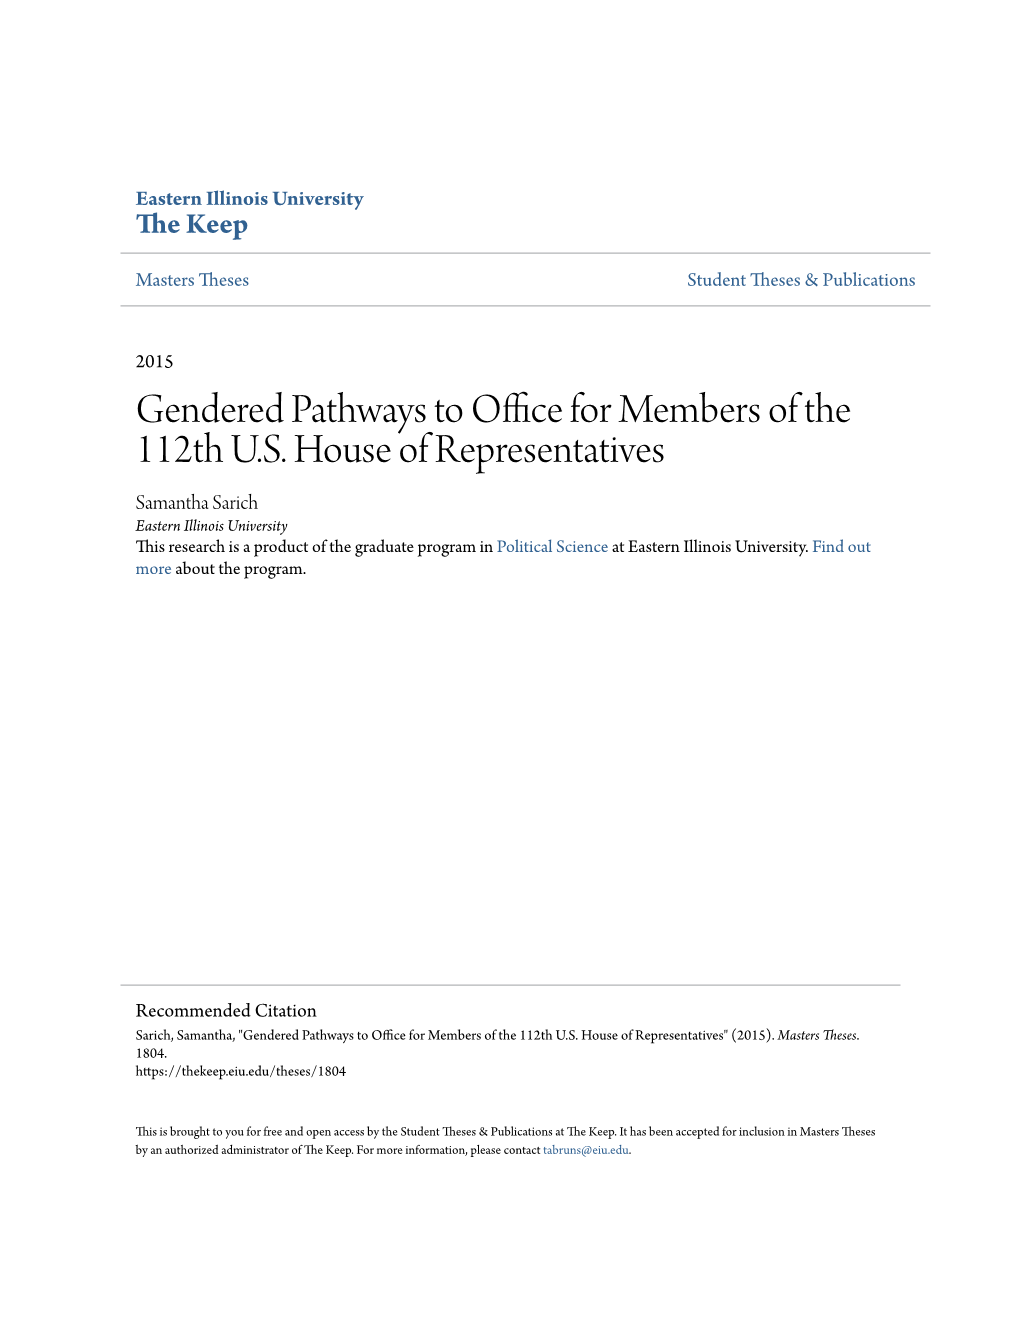 Gendered Pathways to Office for Members of the 112Th U.S. House of Representatives" (2015)